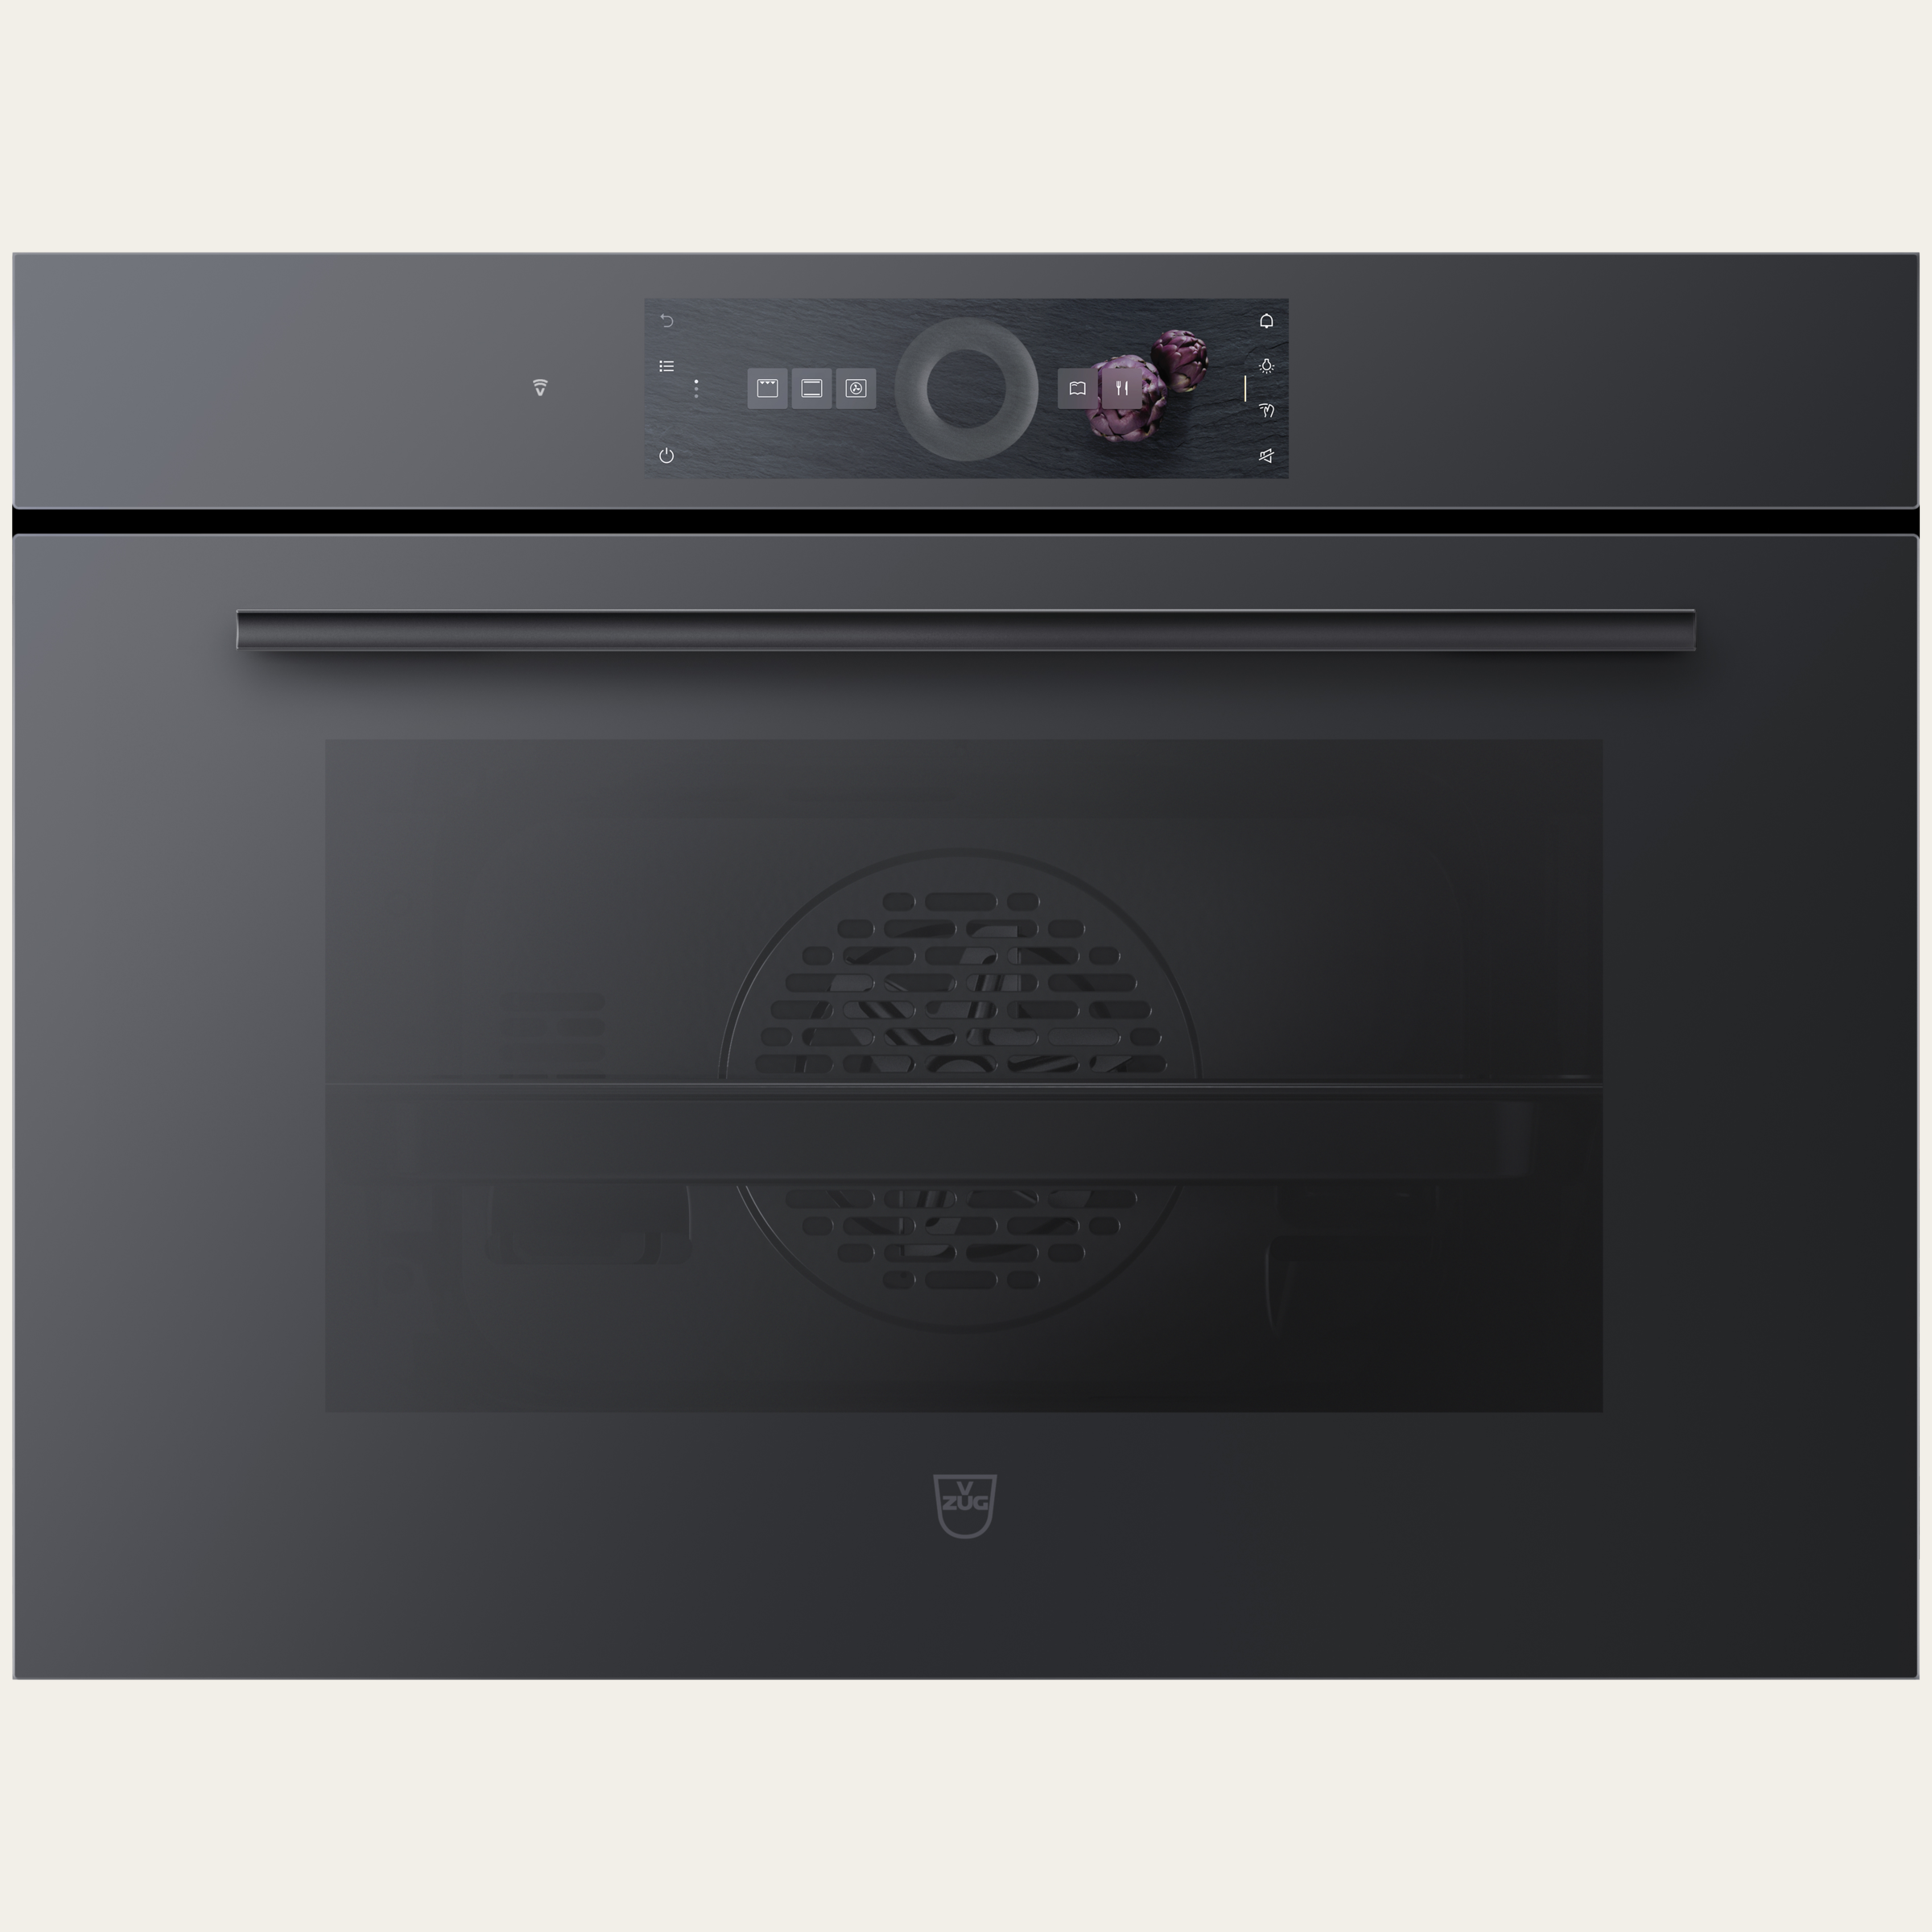 V-ZUG Oven Combair V4000 45P, Standard width: 60 cm,Standard height: 45 cm, Black mirror glass, Touchscreen with CircleSlider, V-ZUG-Home, Pyrolytic self-cleaning